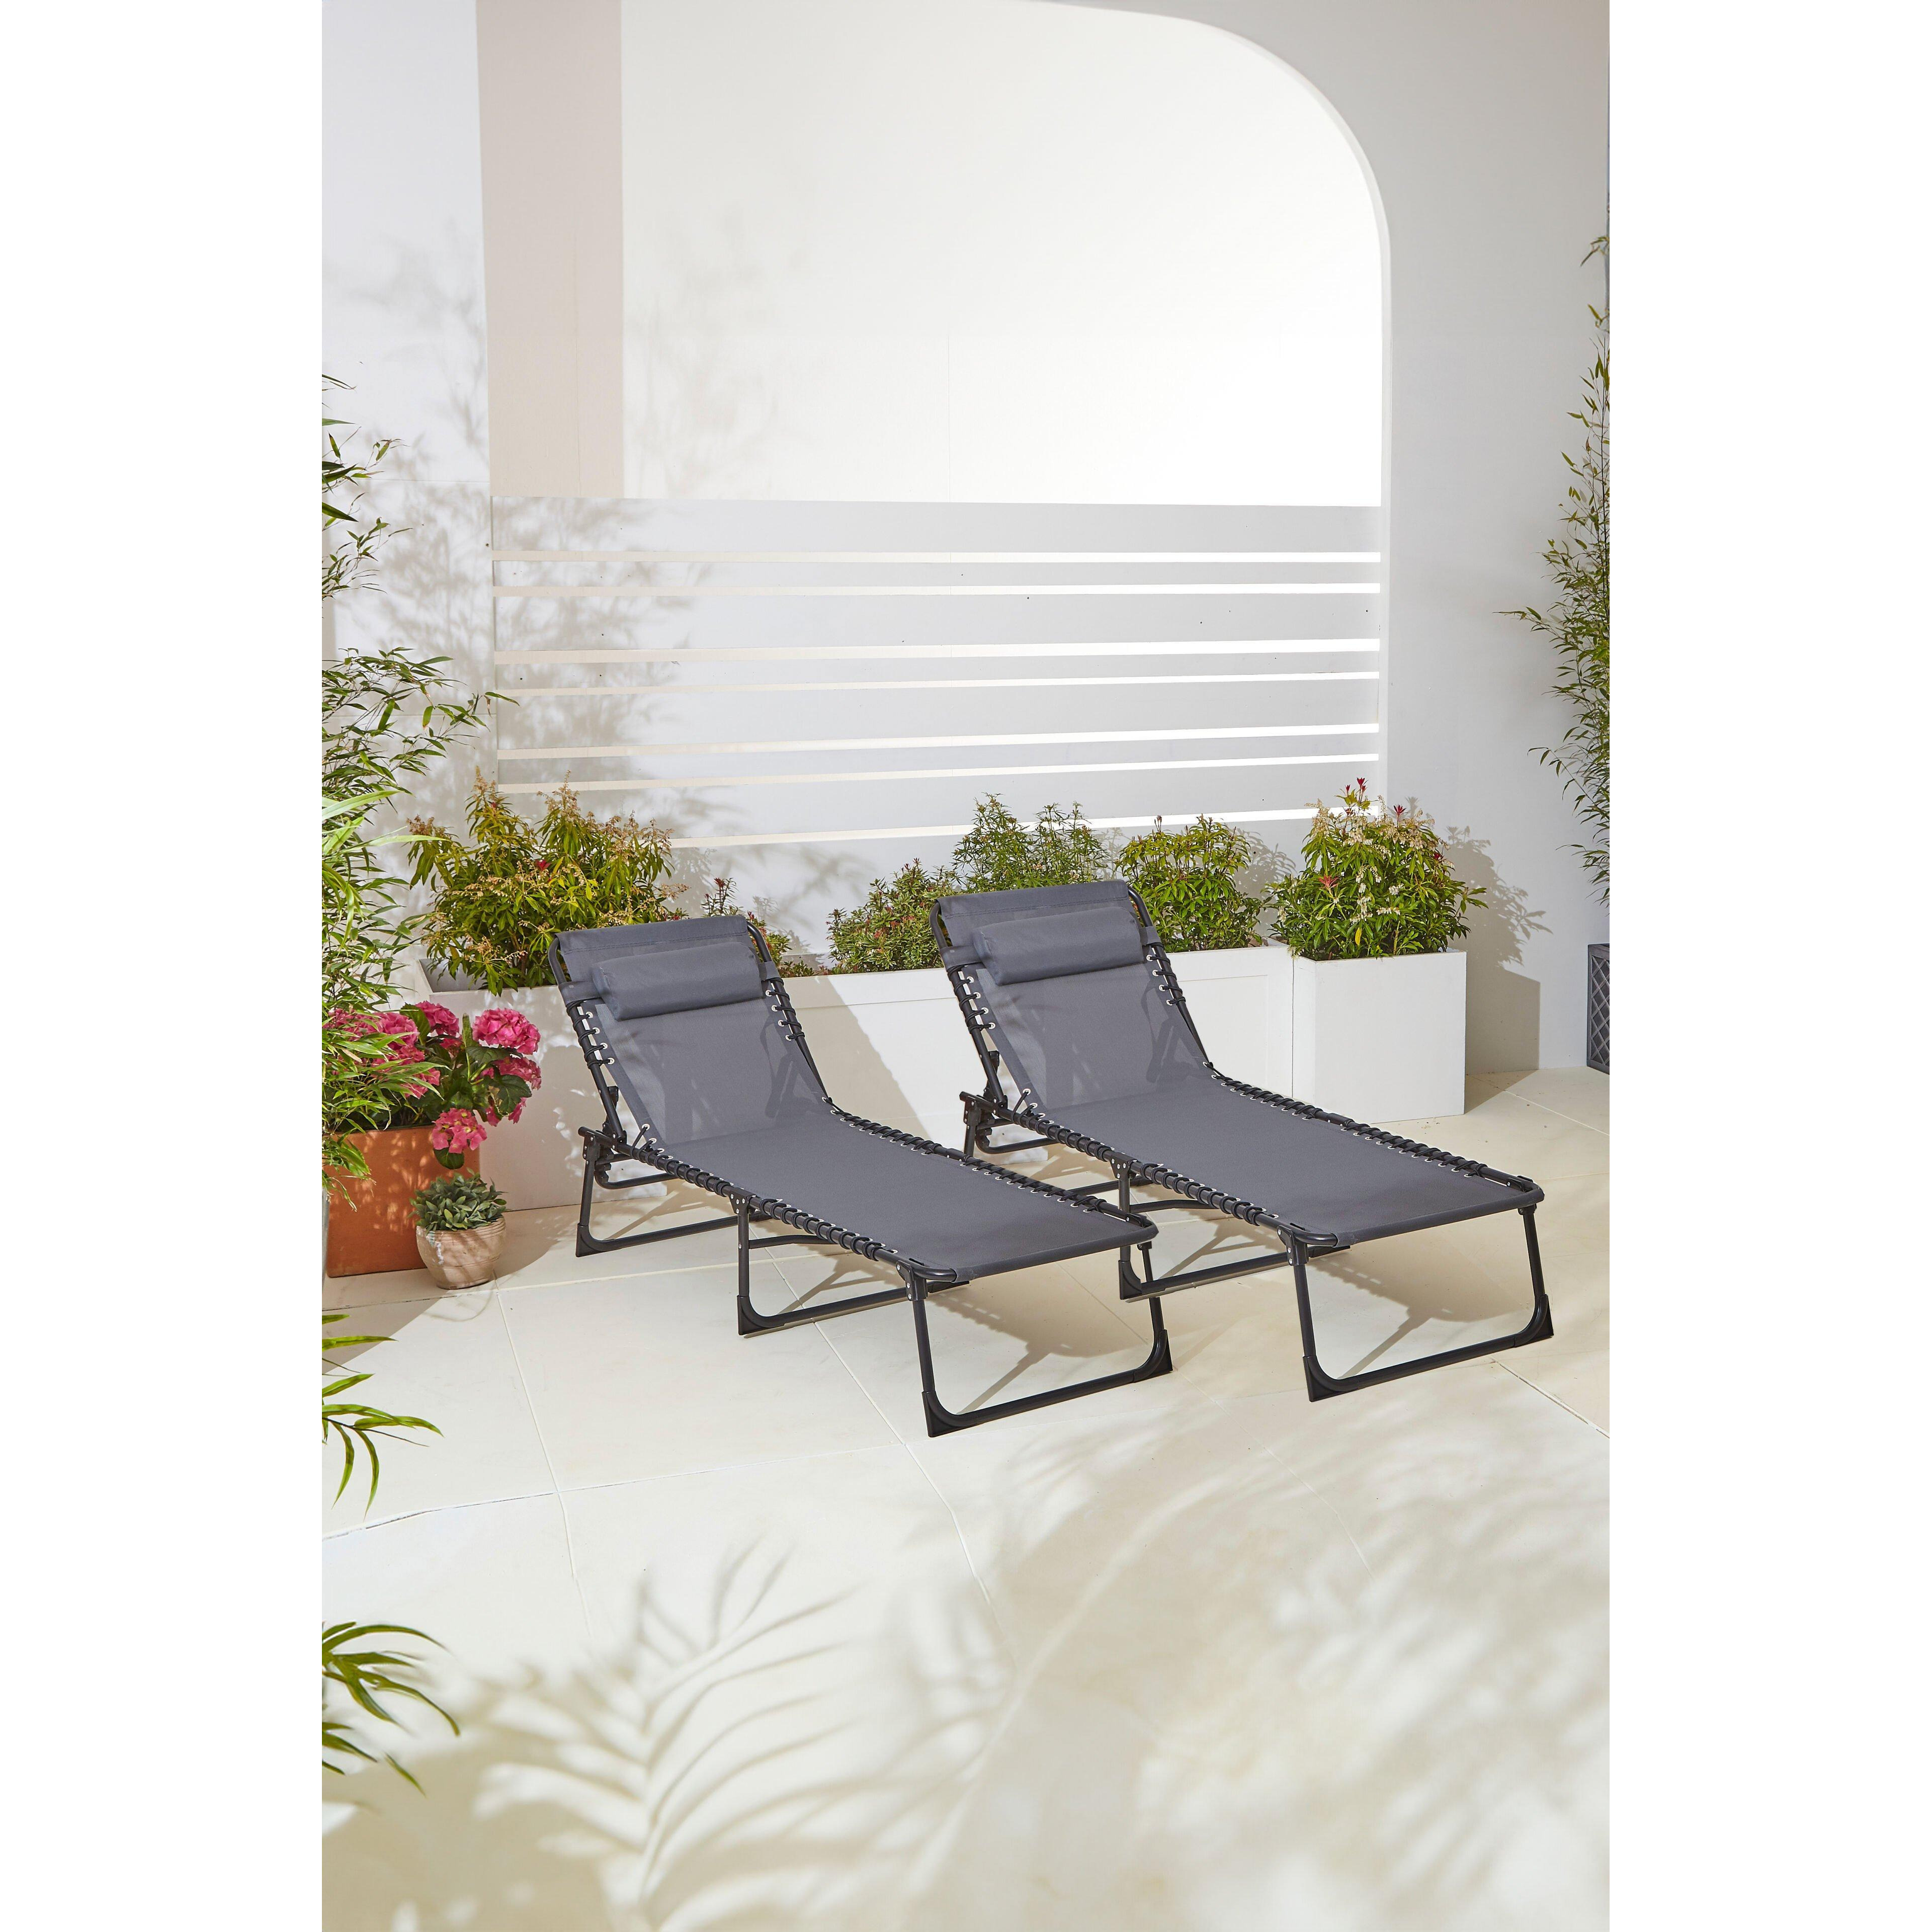 Two Outdoor Folding Sun Loungers - image 1